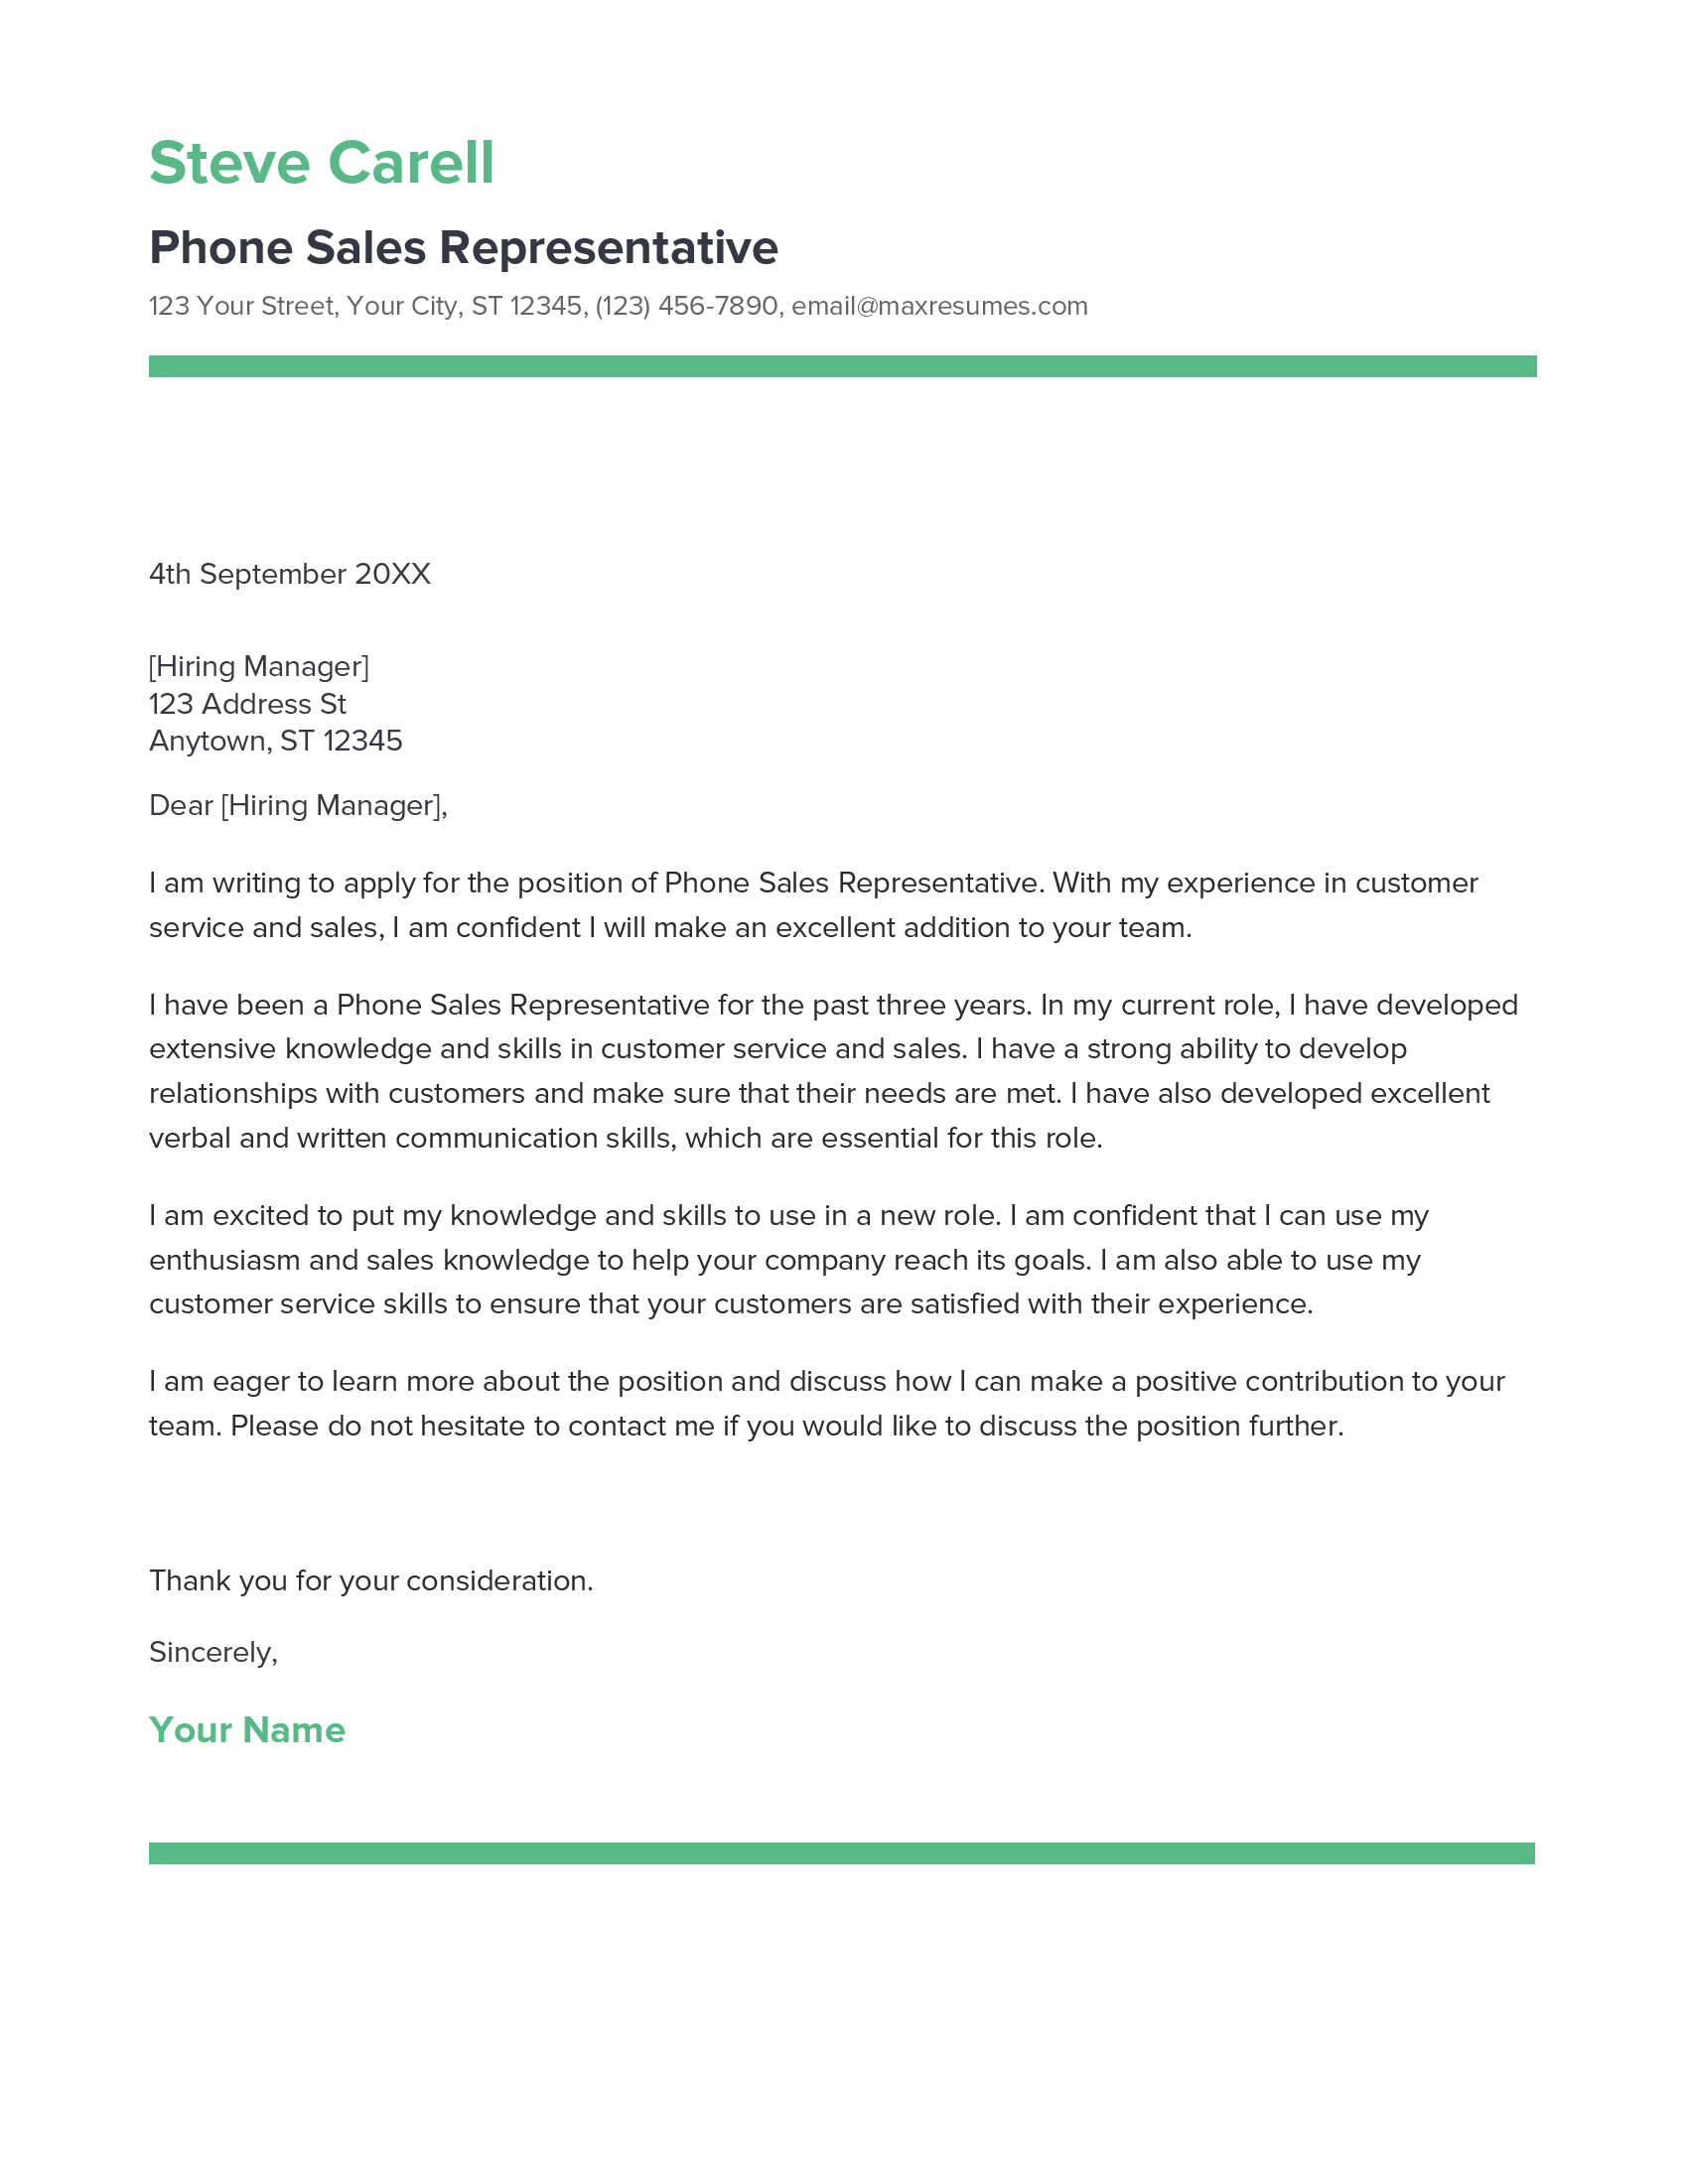 Phone Sales Representative Cover Letter Example